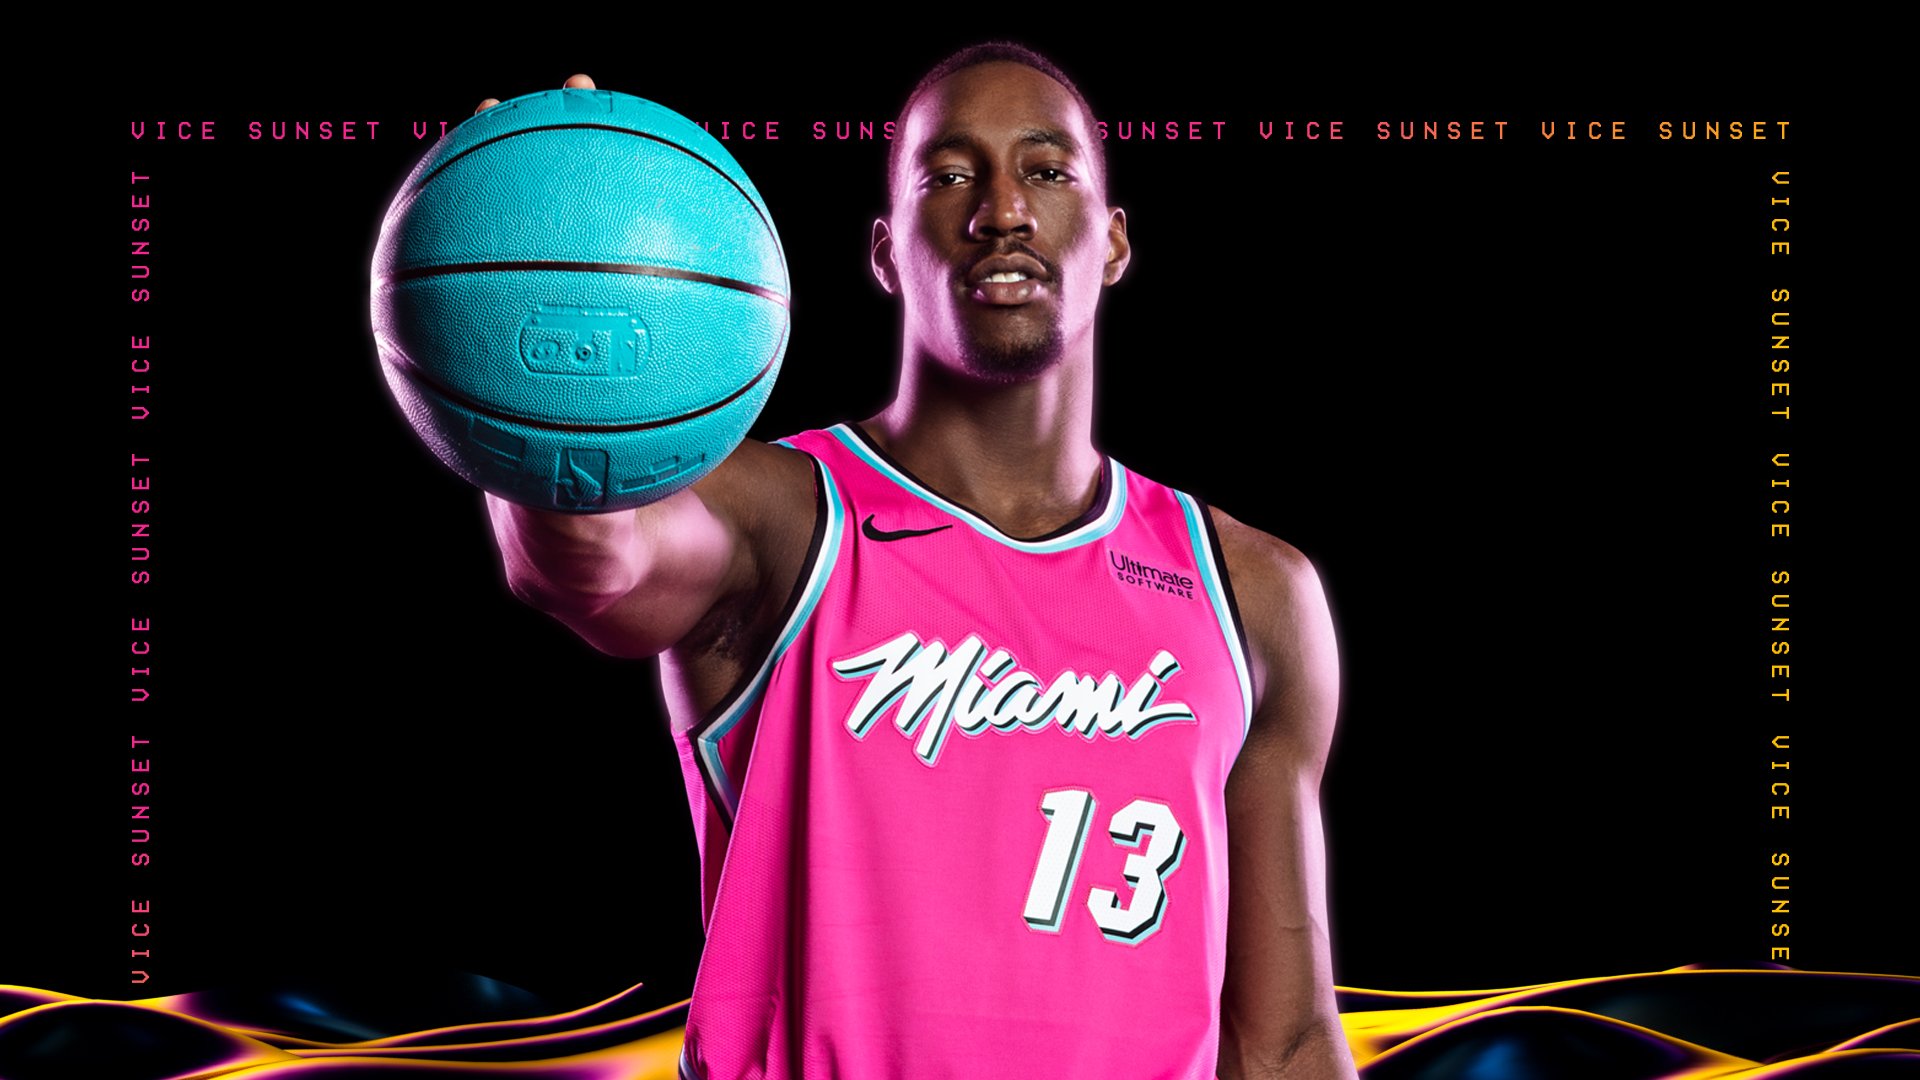 Sunset Vice' marks the latest chapter of the Miami Heat's incredible  uniform run